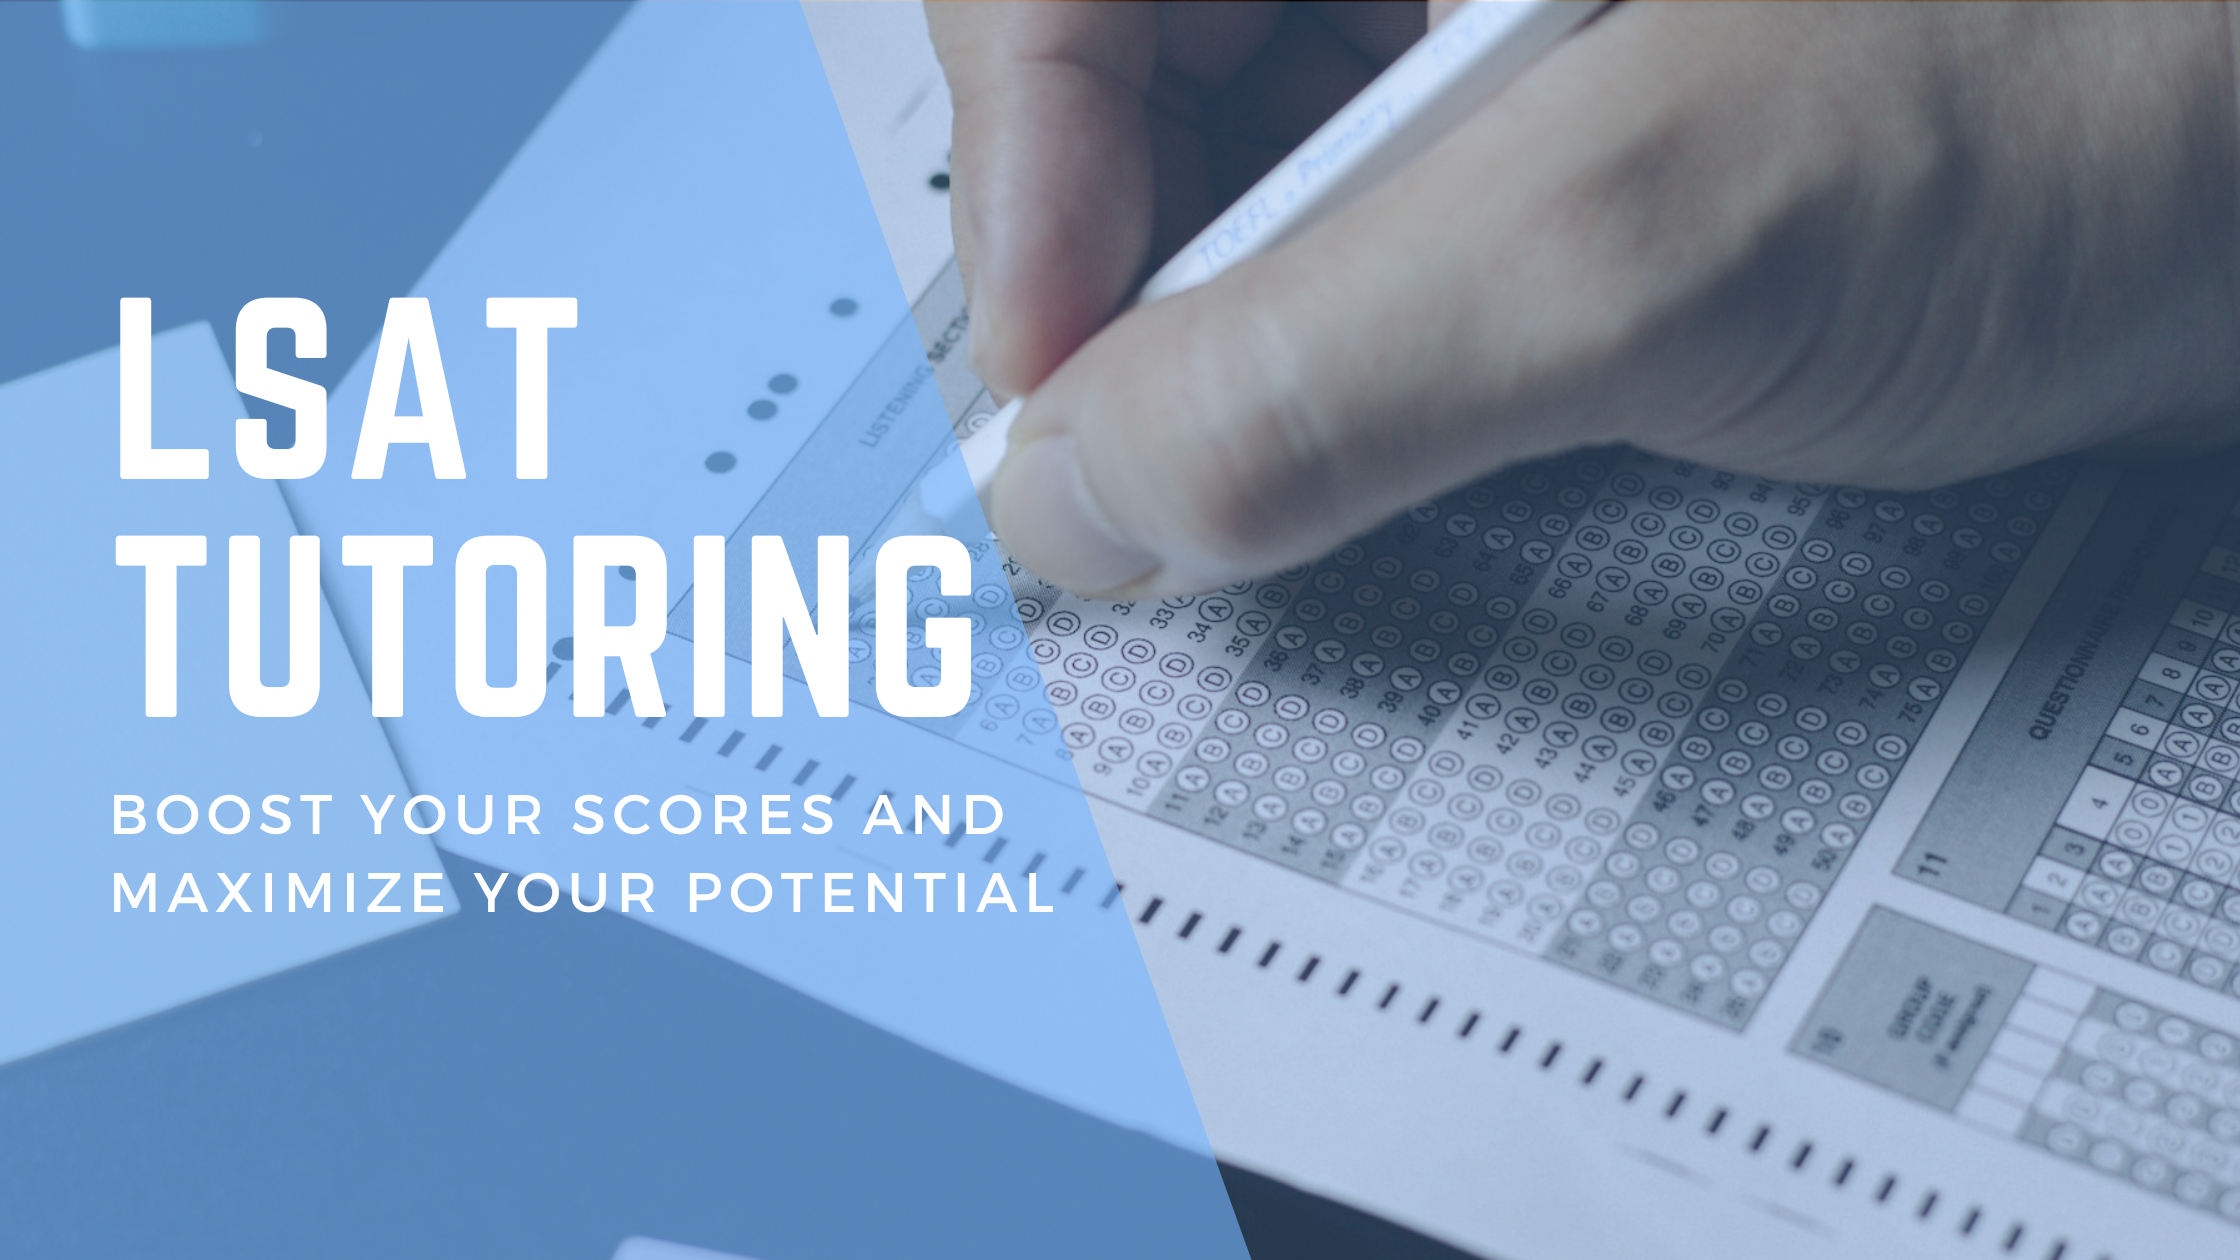 LSAT tutoring Boost your scores and maximize your potential